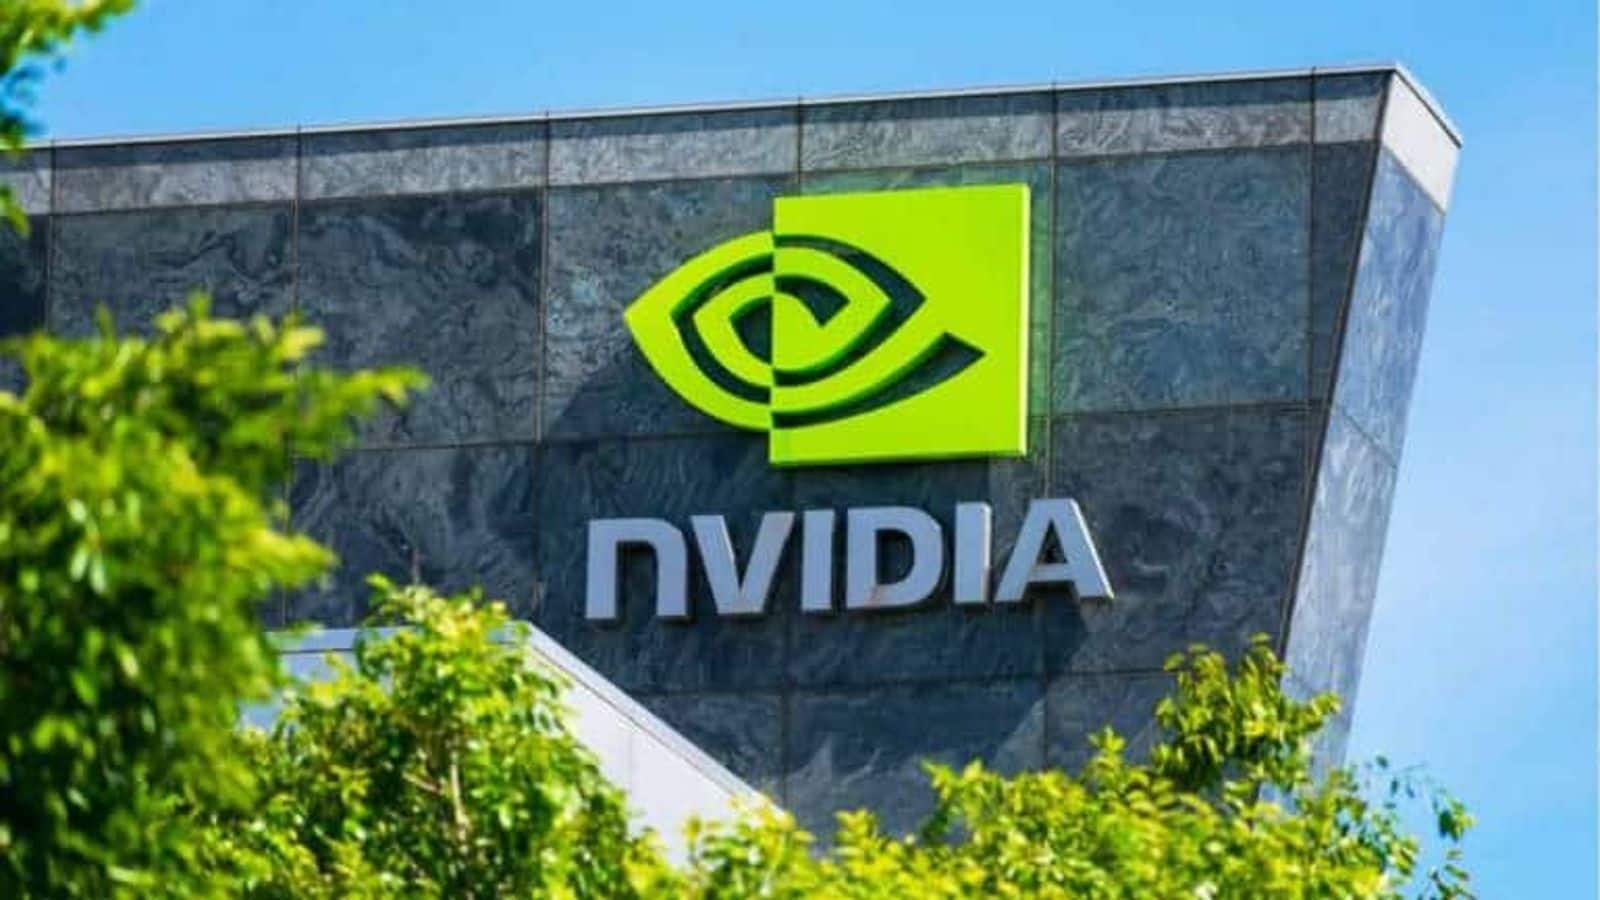 Chinese entities procure NVIDIA AI chips despite US ban: Report